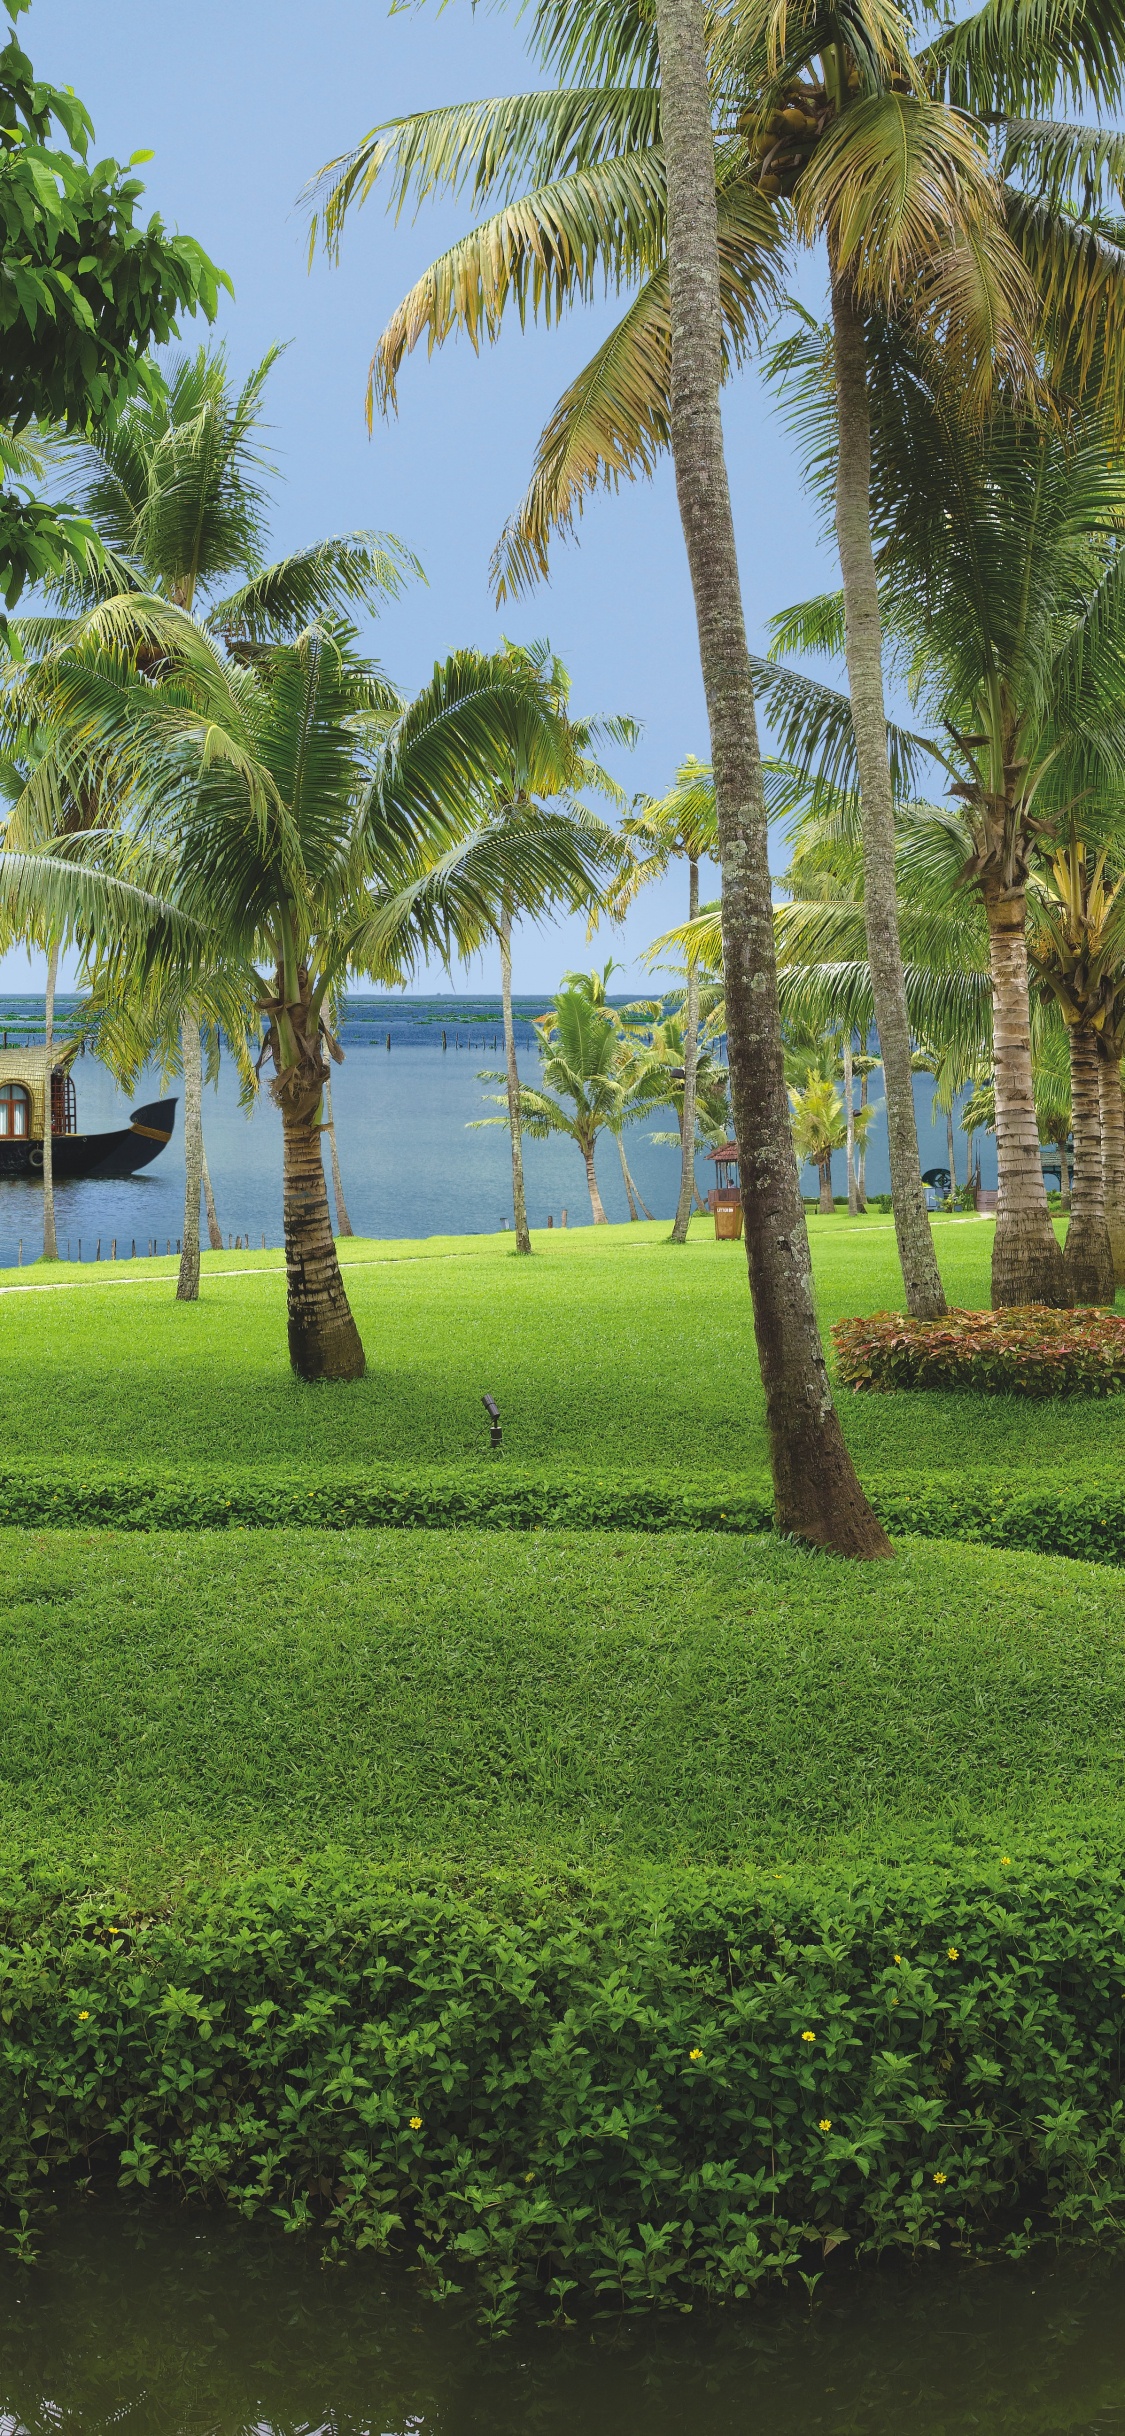 Green Palm Trees Near Body of Water During Daytime. Wallpaper in 1125x2436 Resolution